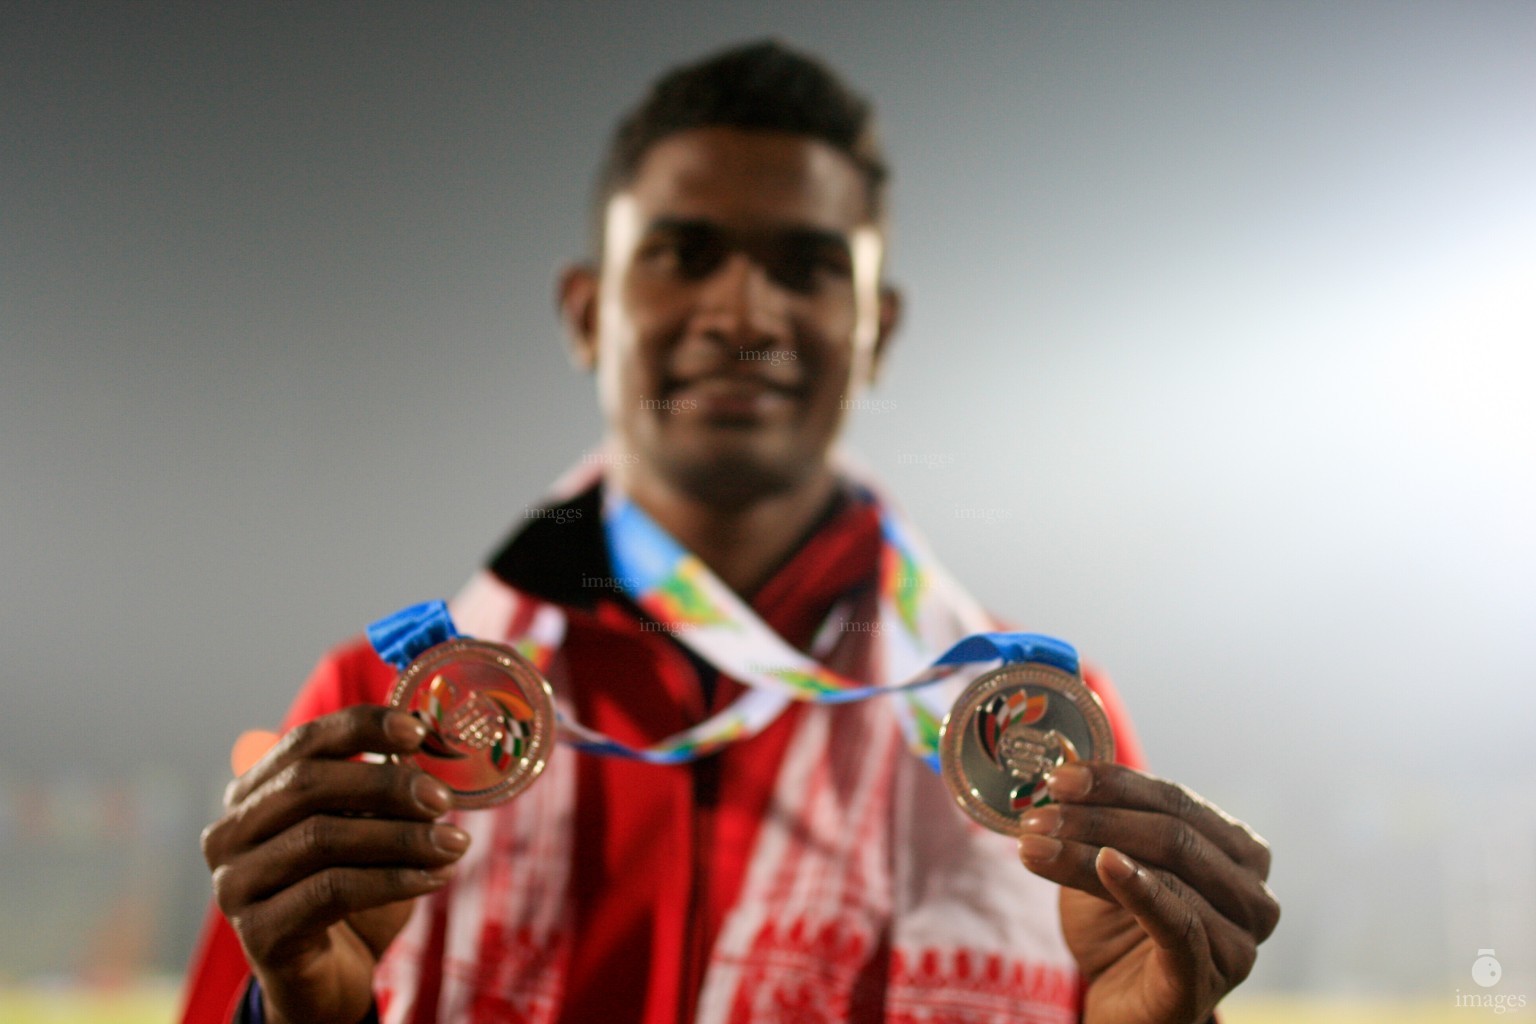 Hassan Said of Maldives wins the Silver medal in the 100m finals in the South Asian Games in Guwahati, India, Thursday, February. 11, 2016. (Images.mv Photo/ Hussain Sinan).